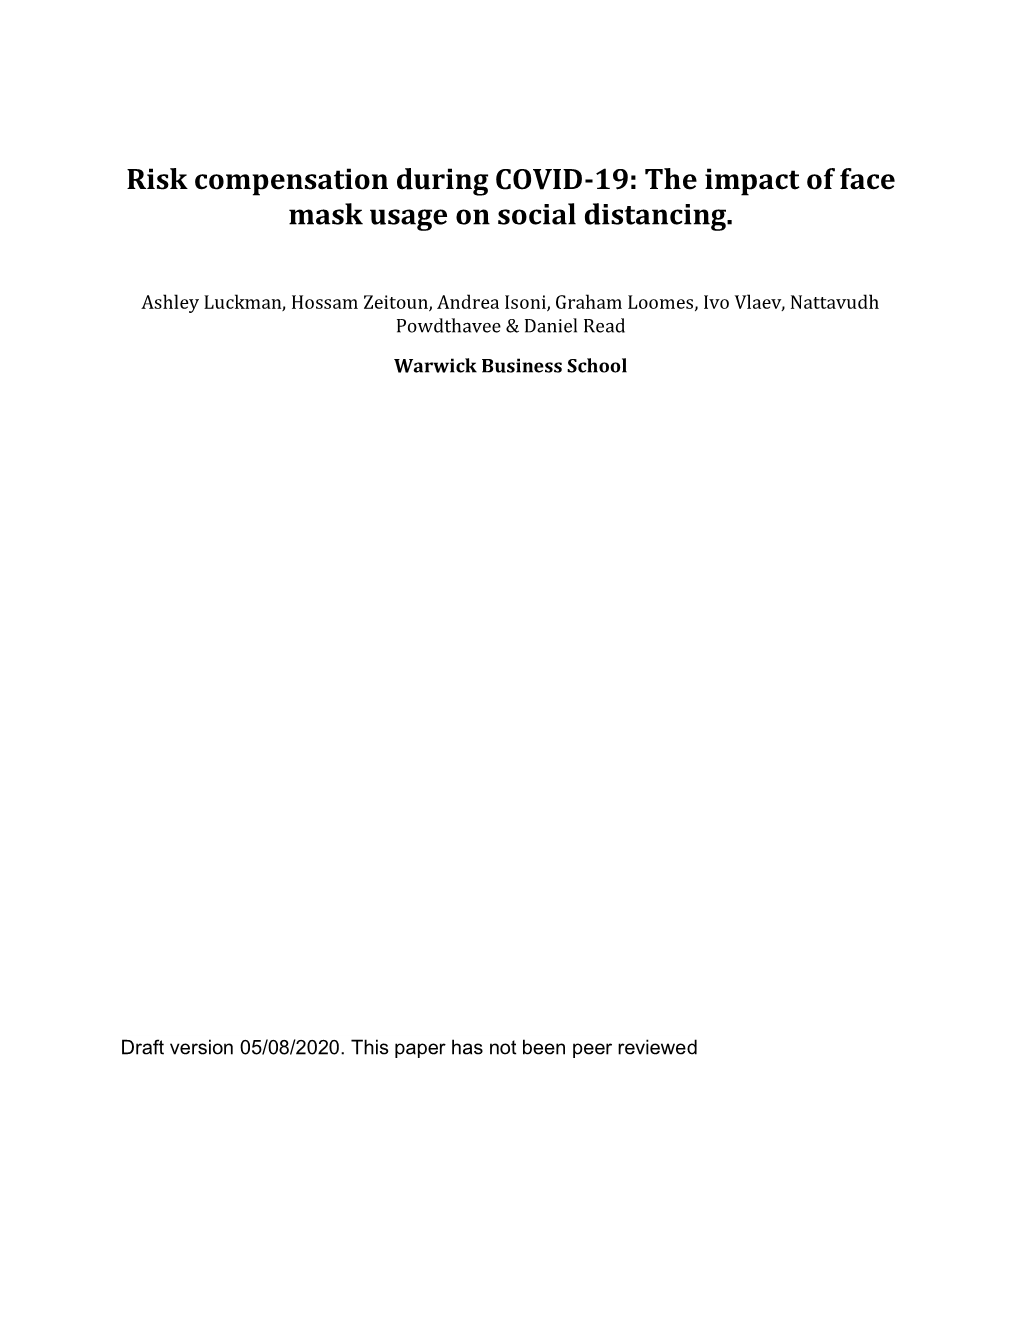 Risk Compensation During COVID-19: the Impact of Face Mask Usage on Social Distancing